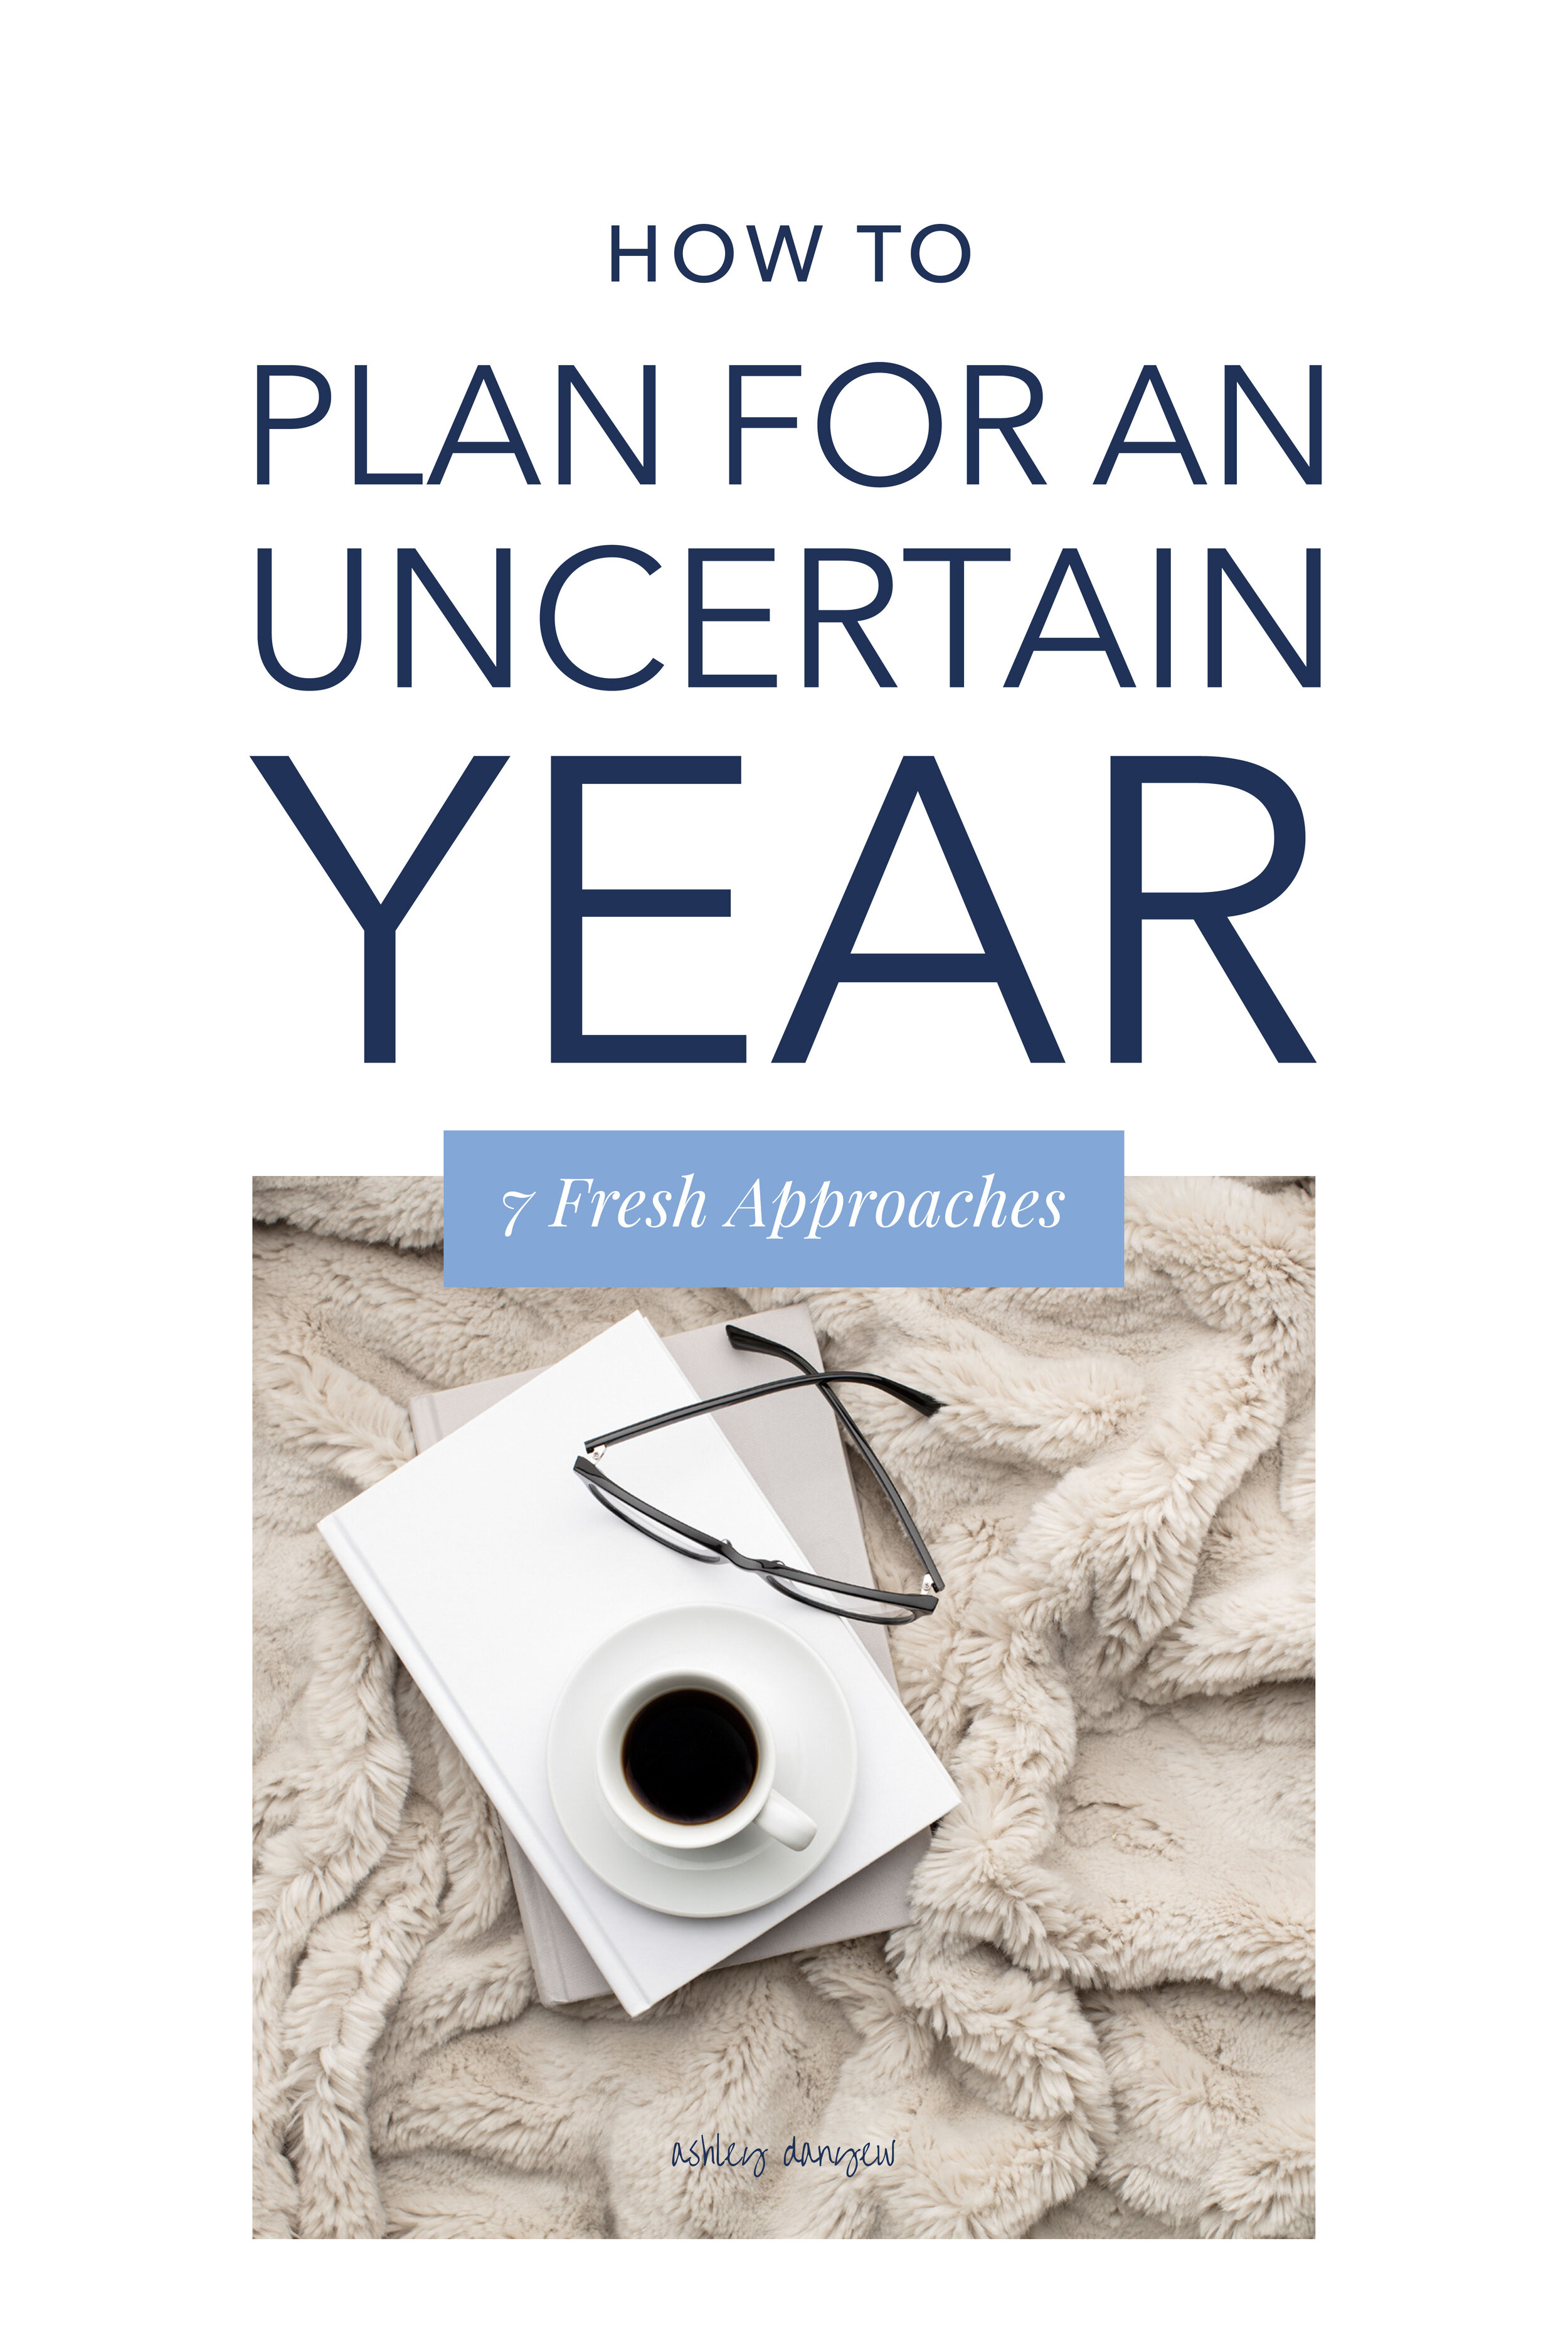 How to Plan for an Uncertain Year (7 Fresh Approaches)